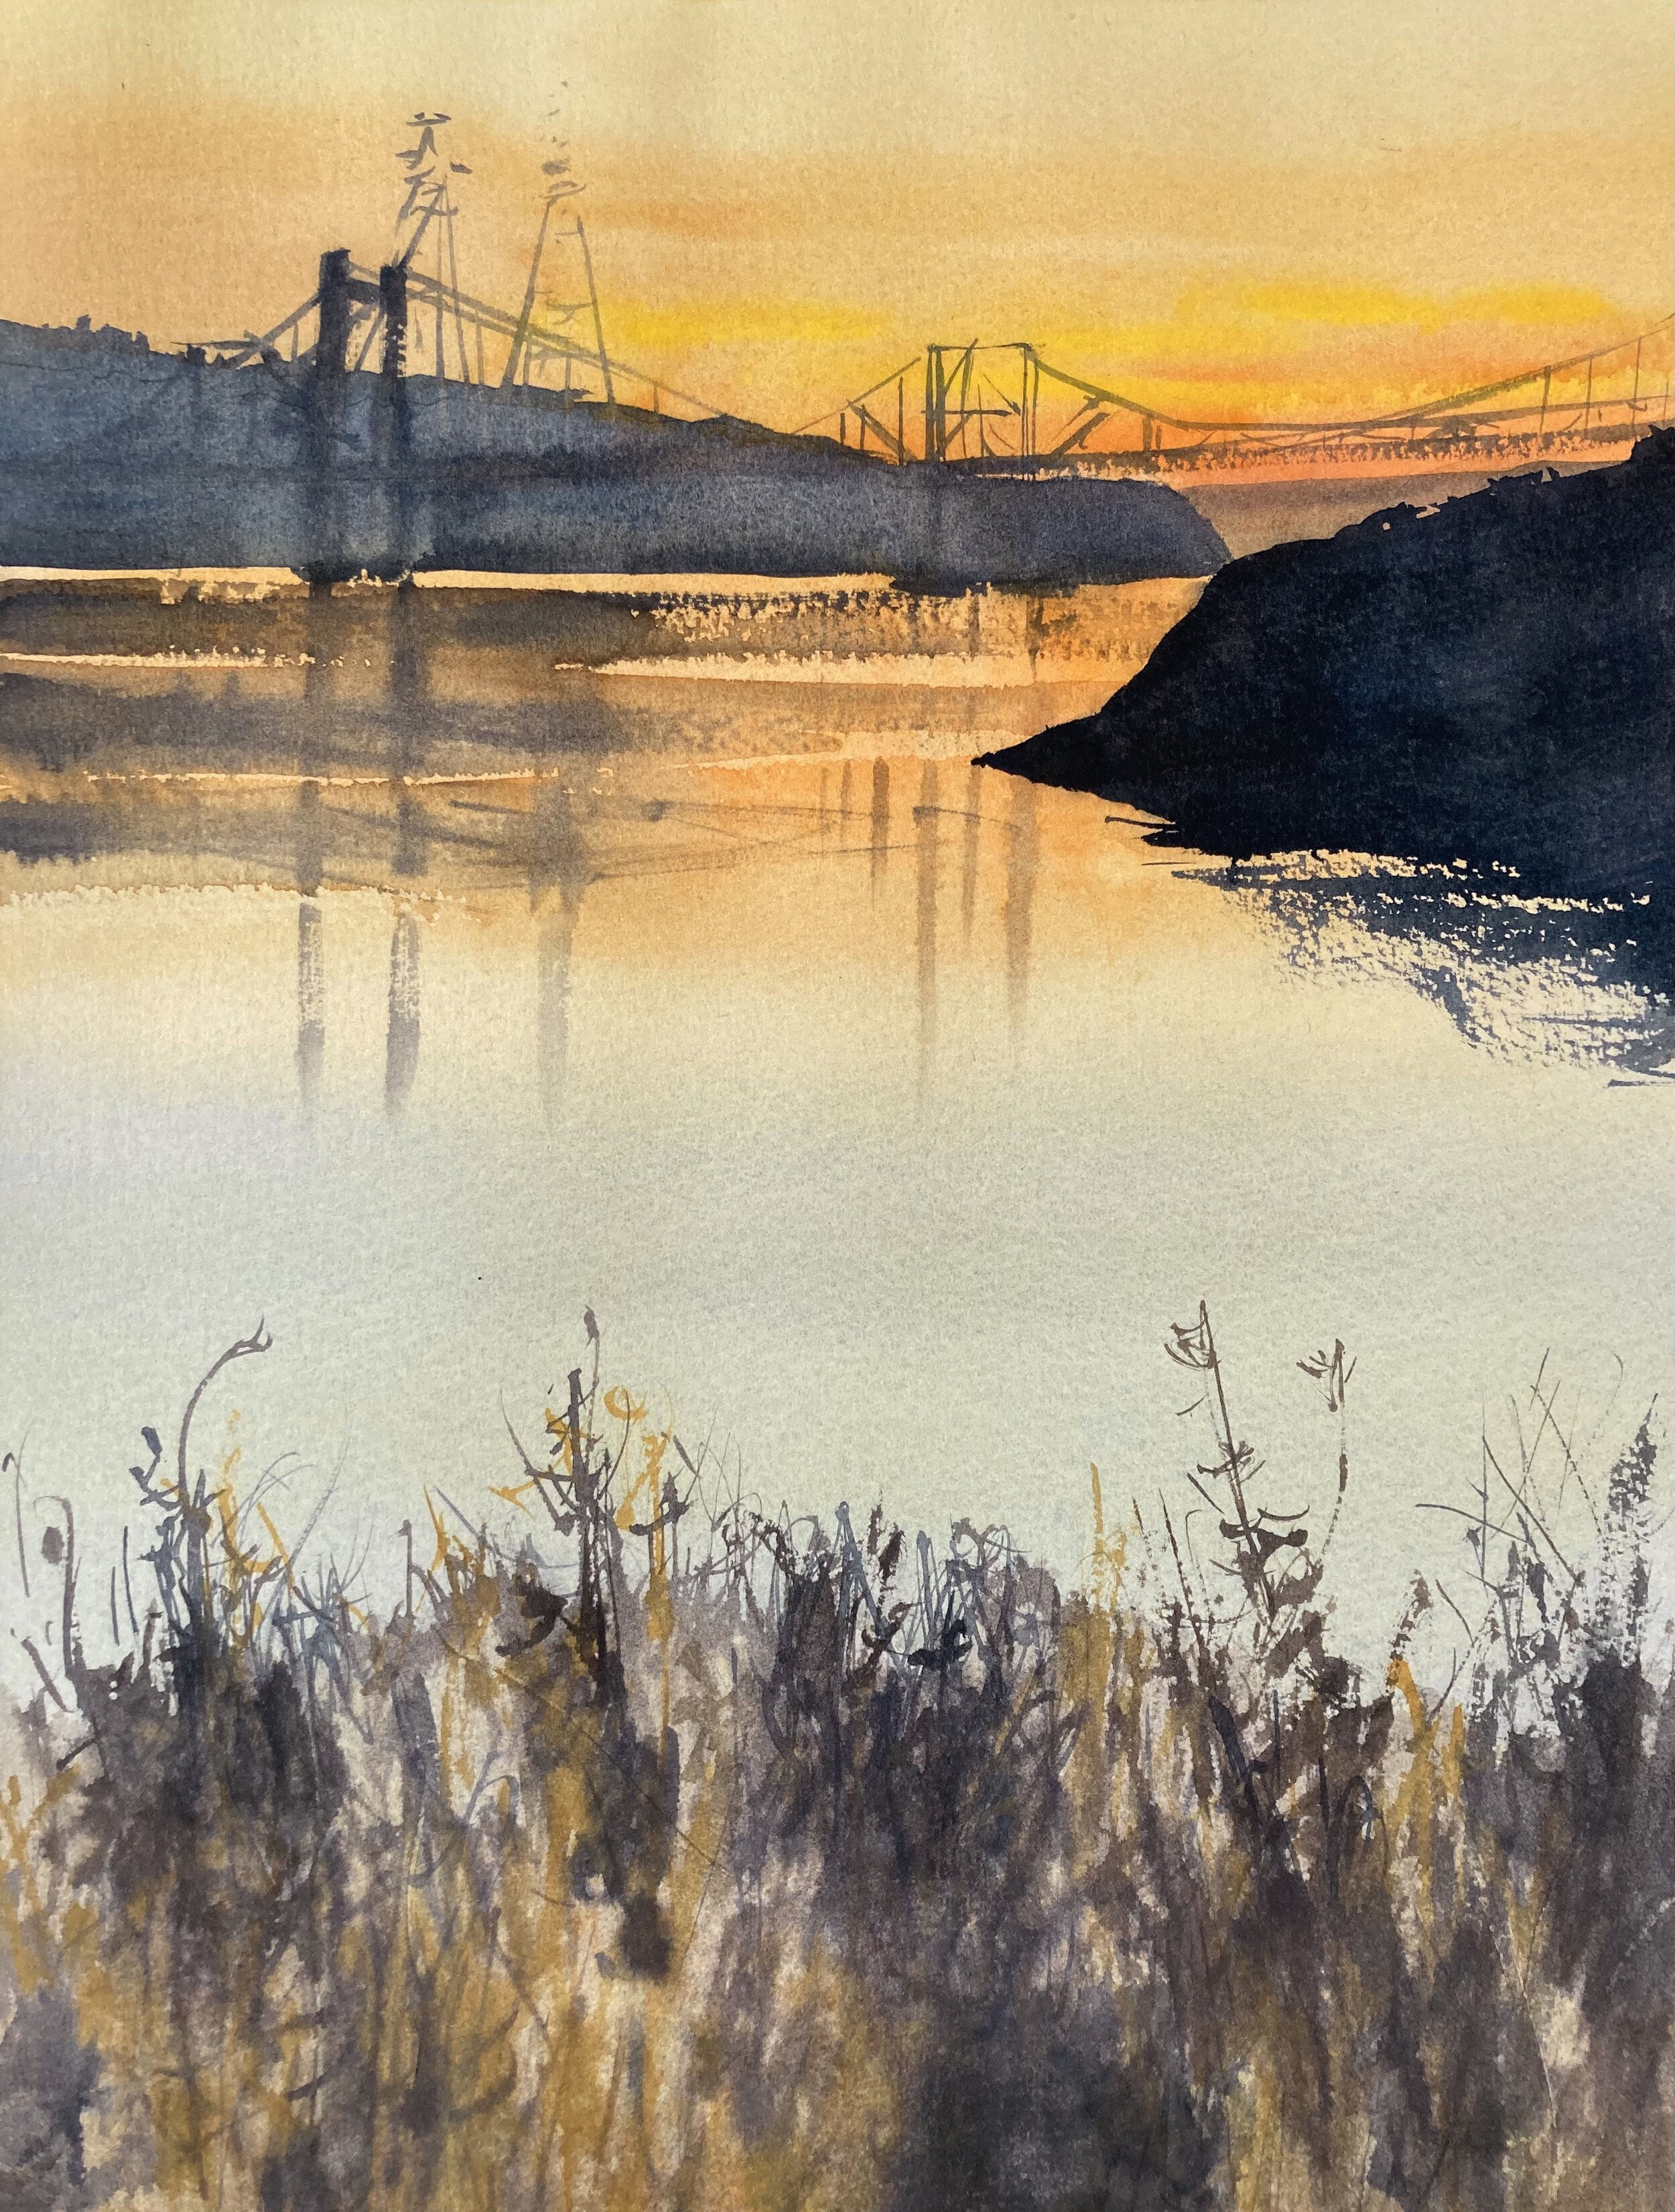 The Perfect Limited Palette for Watercolor Landscapes - The